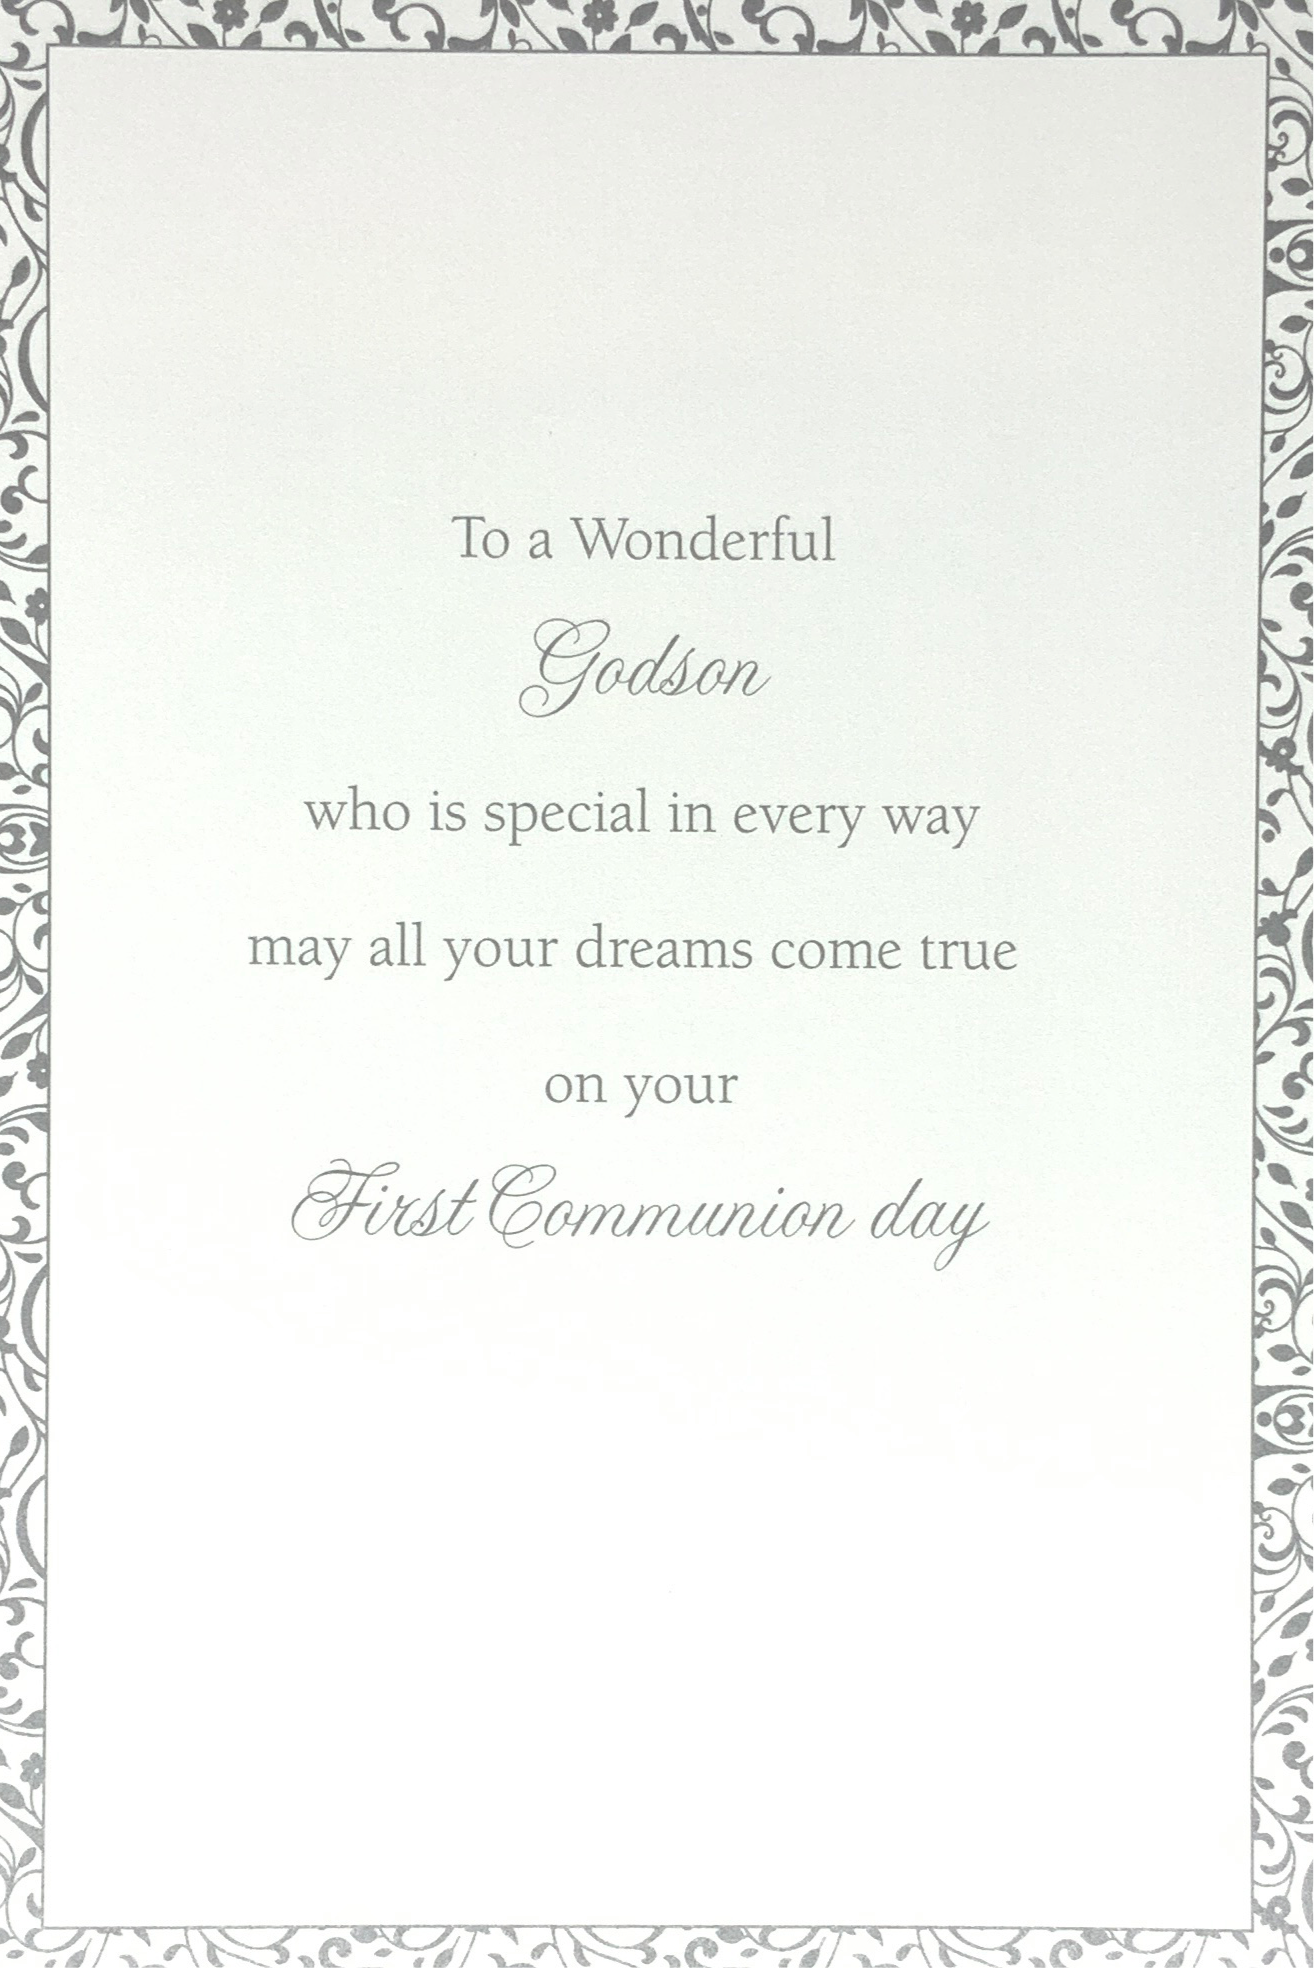 Communion Card - To A Special Godson